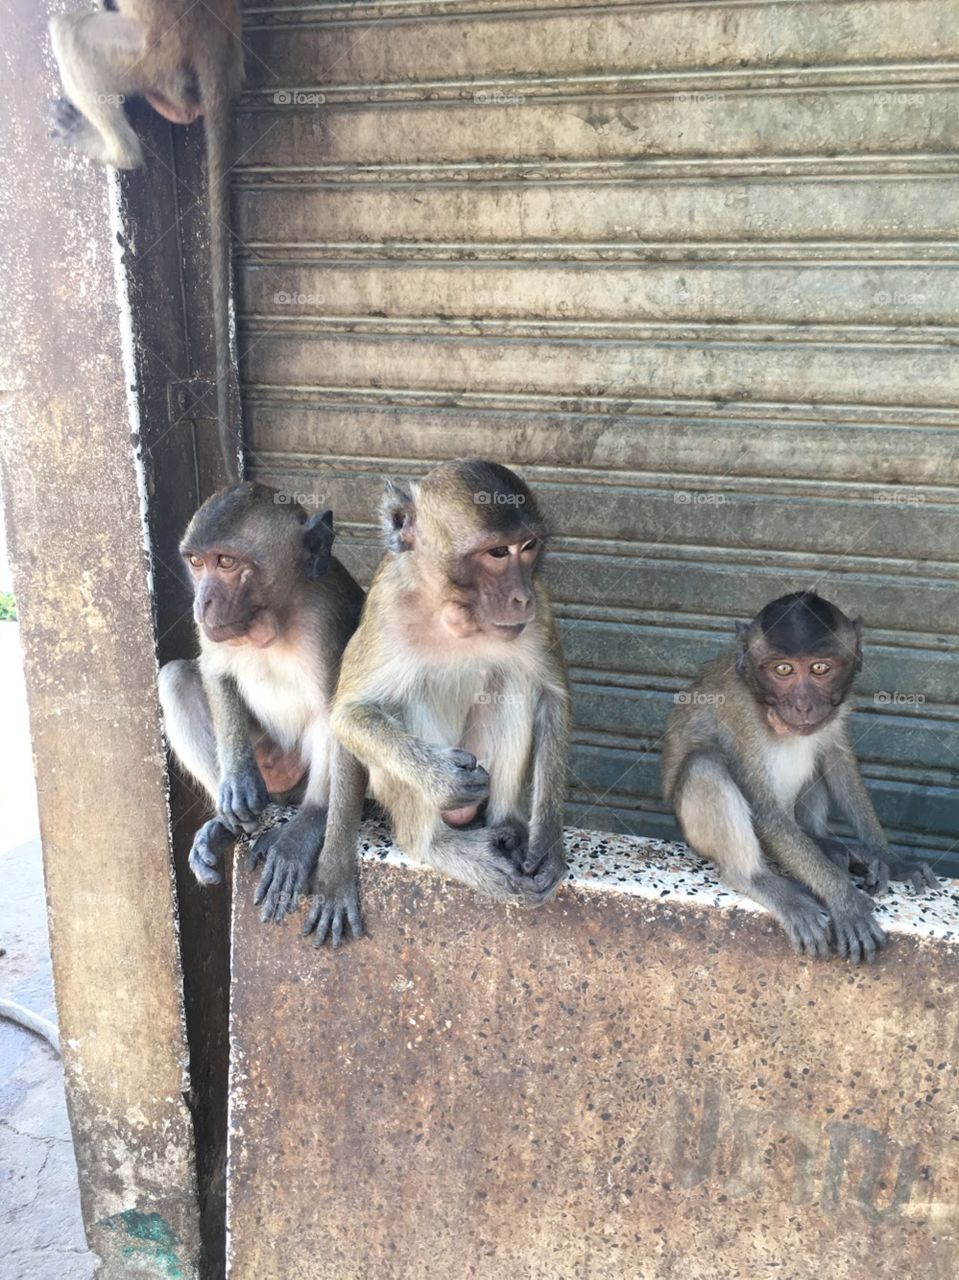 These 3 little friends were enjoying their company just sitting under the shade and relaxing after have some treats 